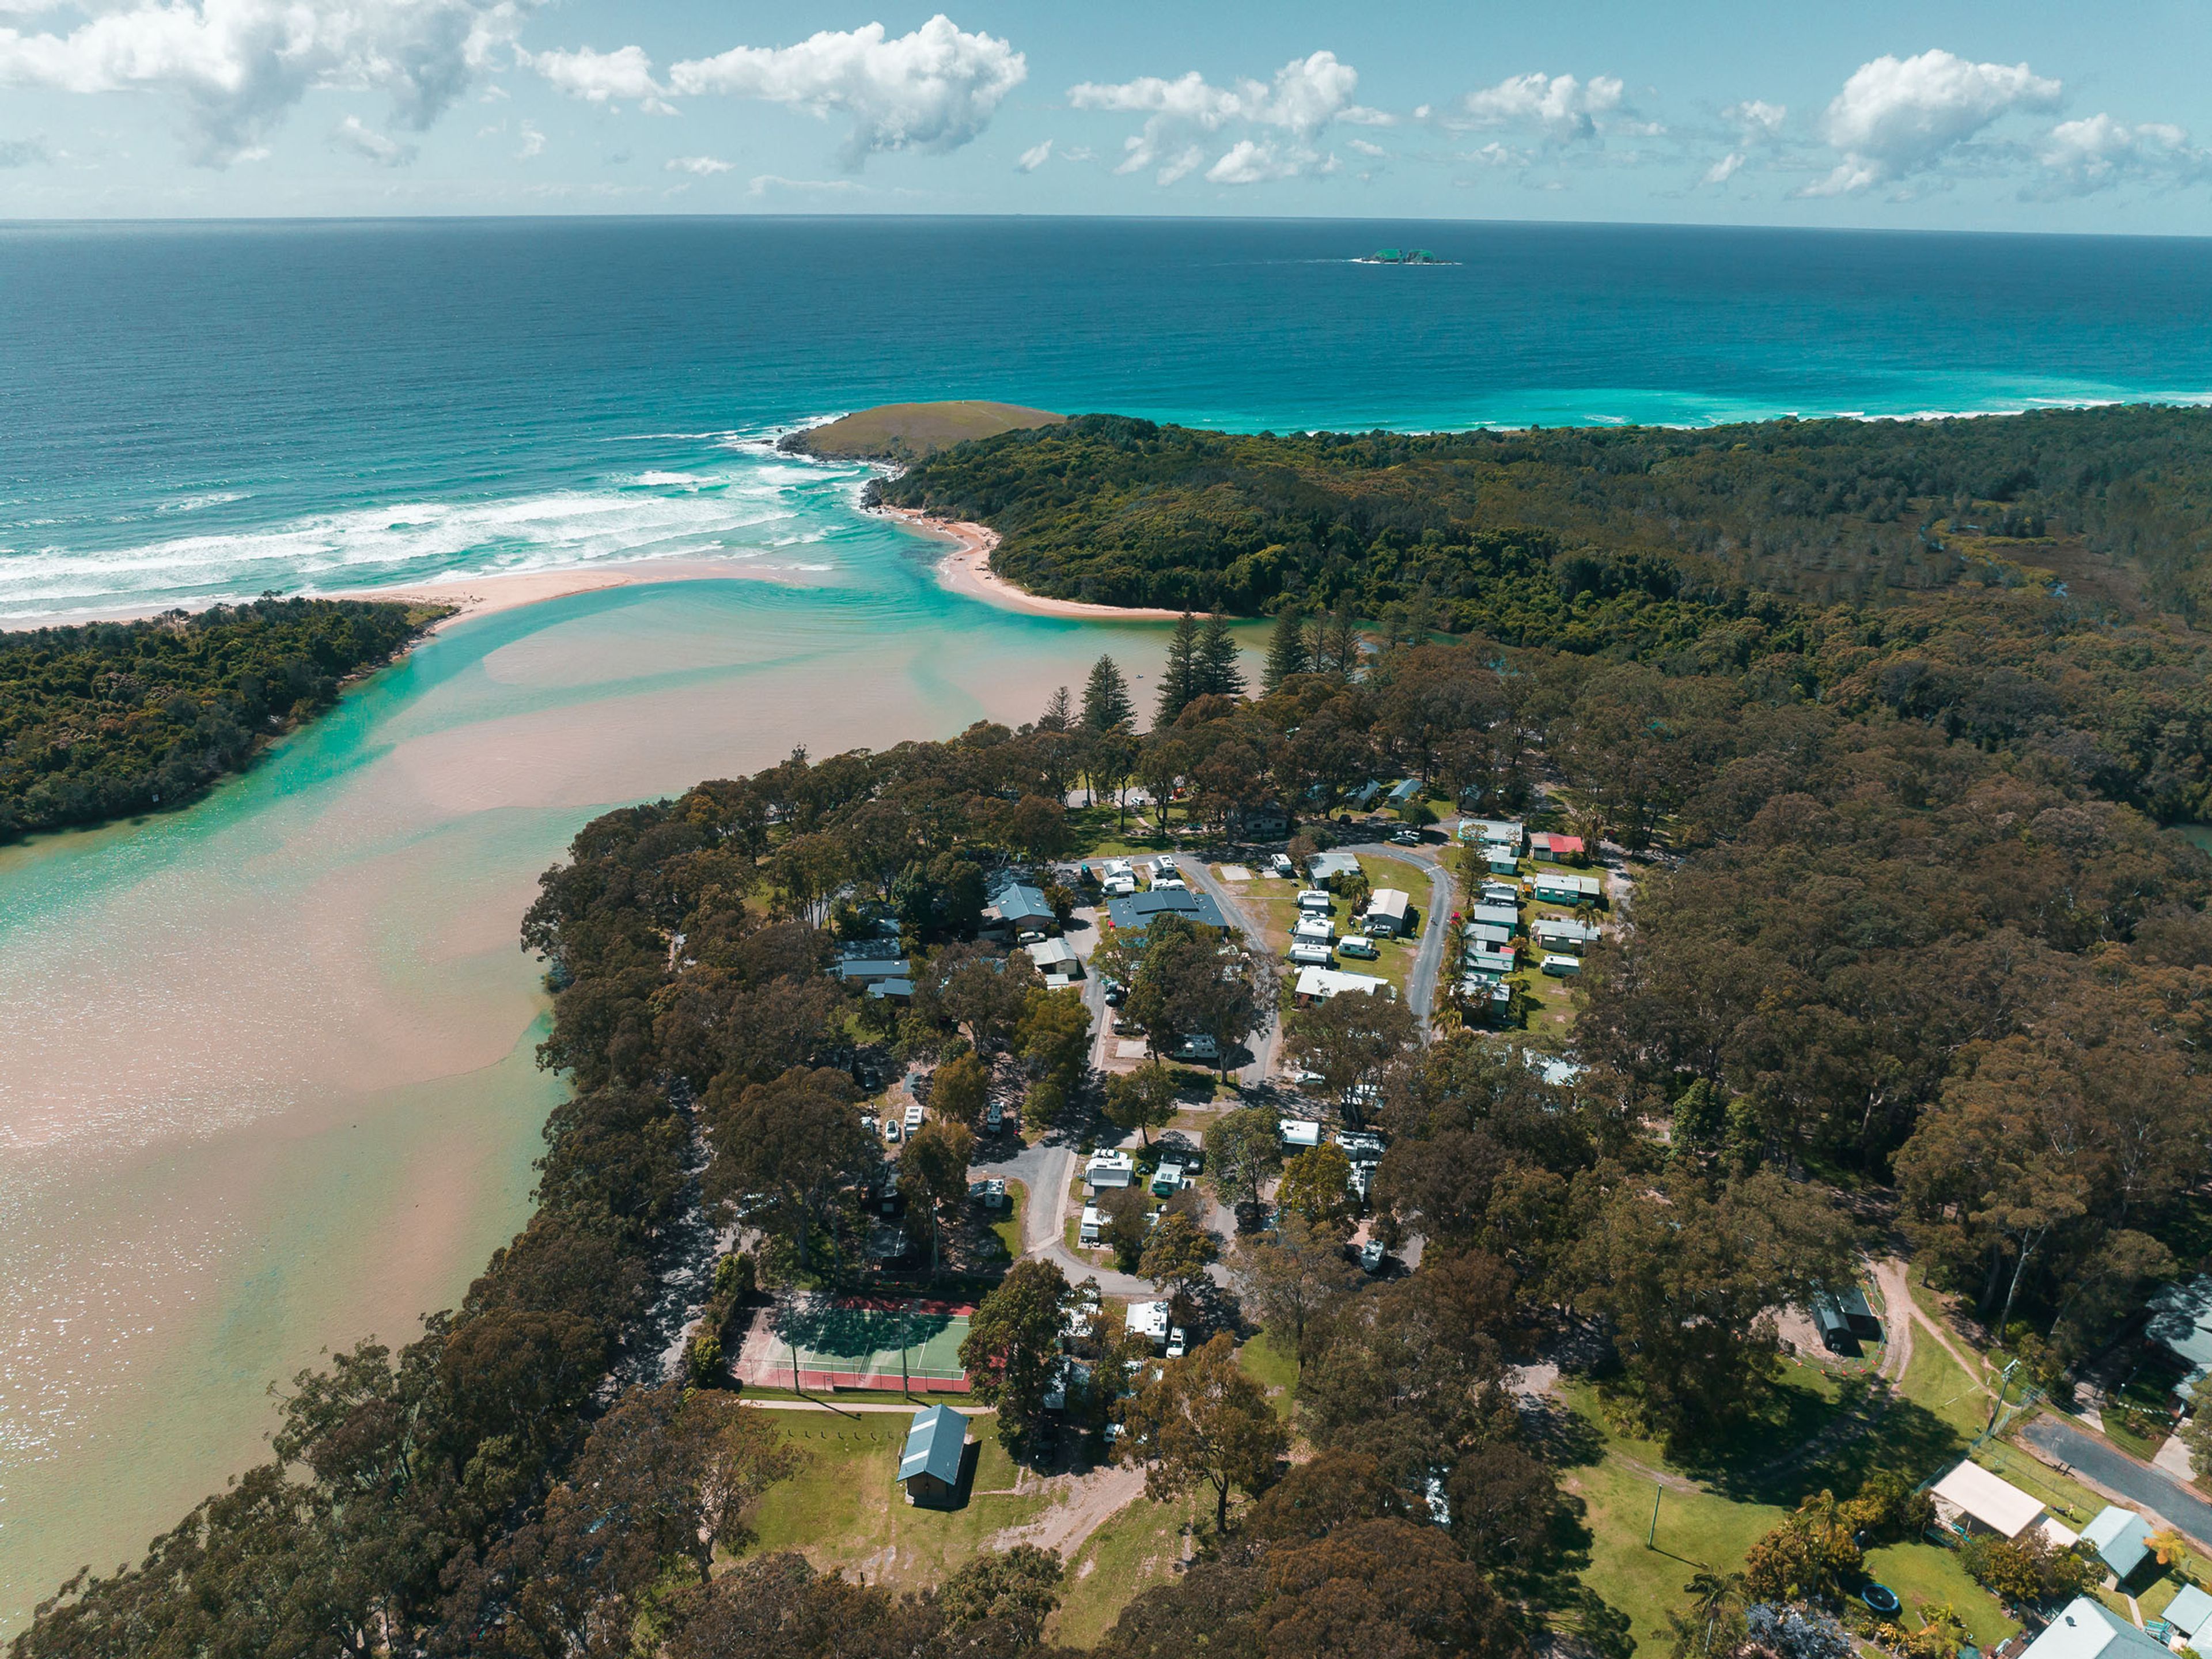 Reflections Moonee Beach holiday & caravan park ariel drone shot overlooking the park and beach